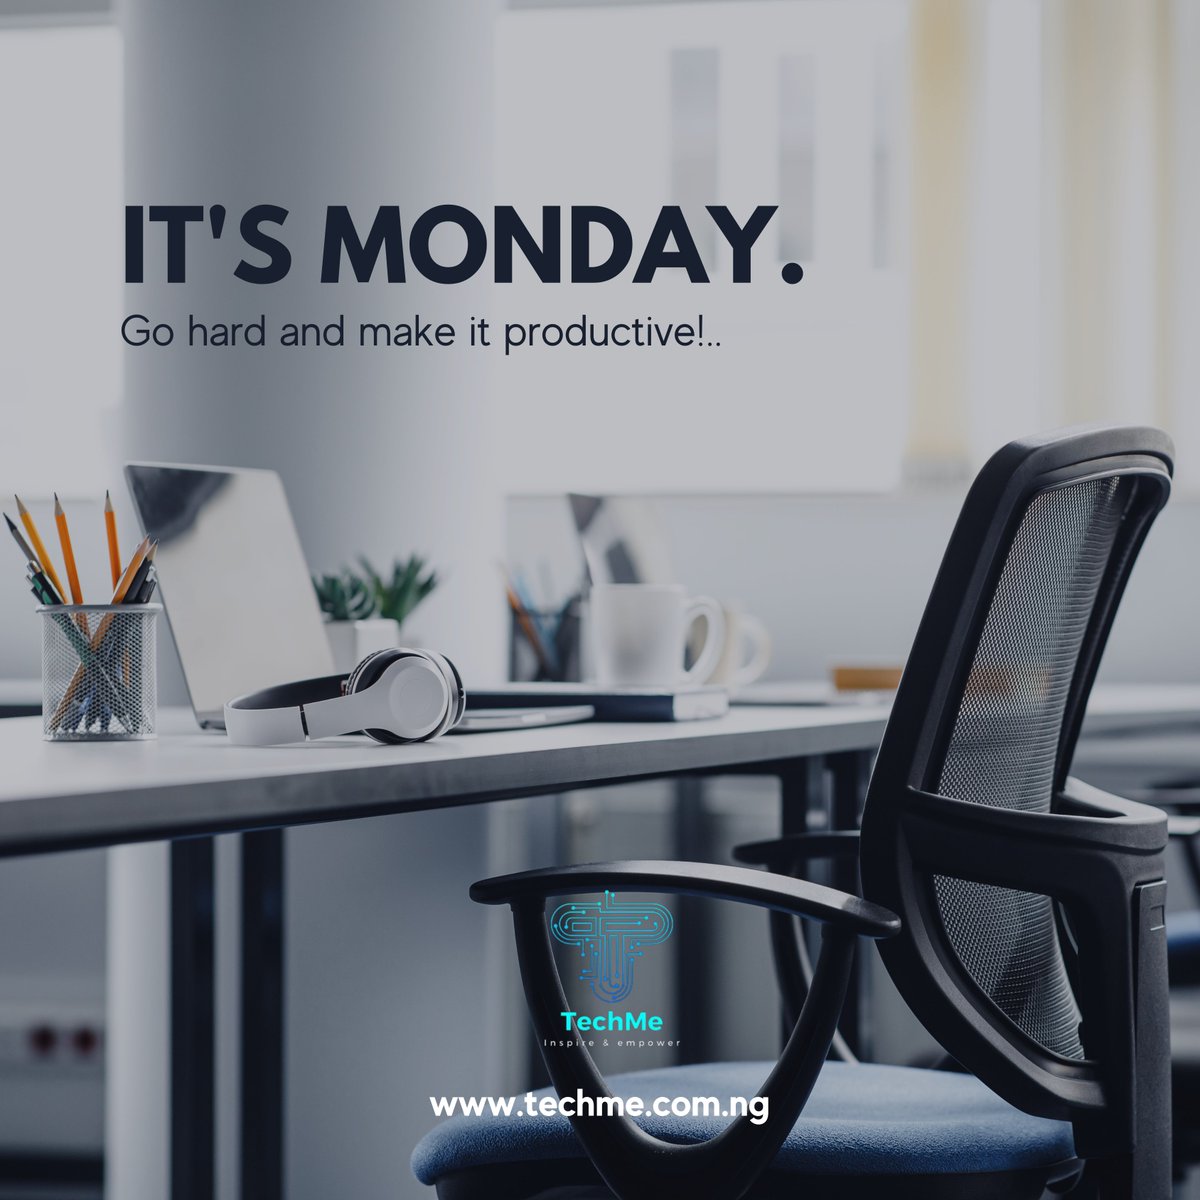 Give it your best, Give it your all.
Start strong and finish strong!

We are TechMe Ng, And we wish you a productive week.

#scrummaster #tech #technology #techblogger